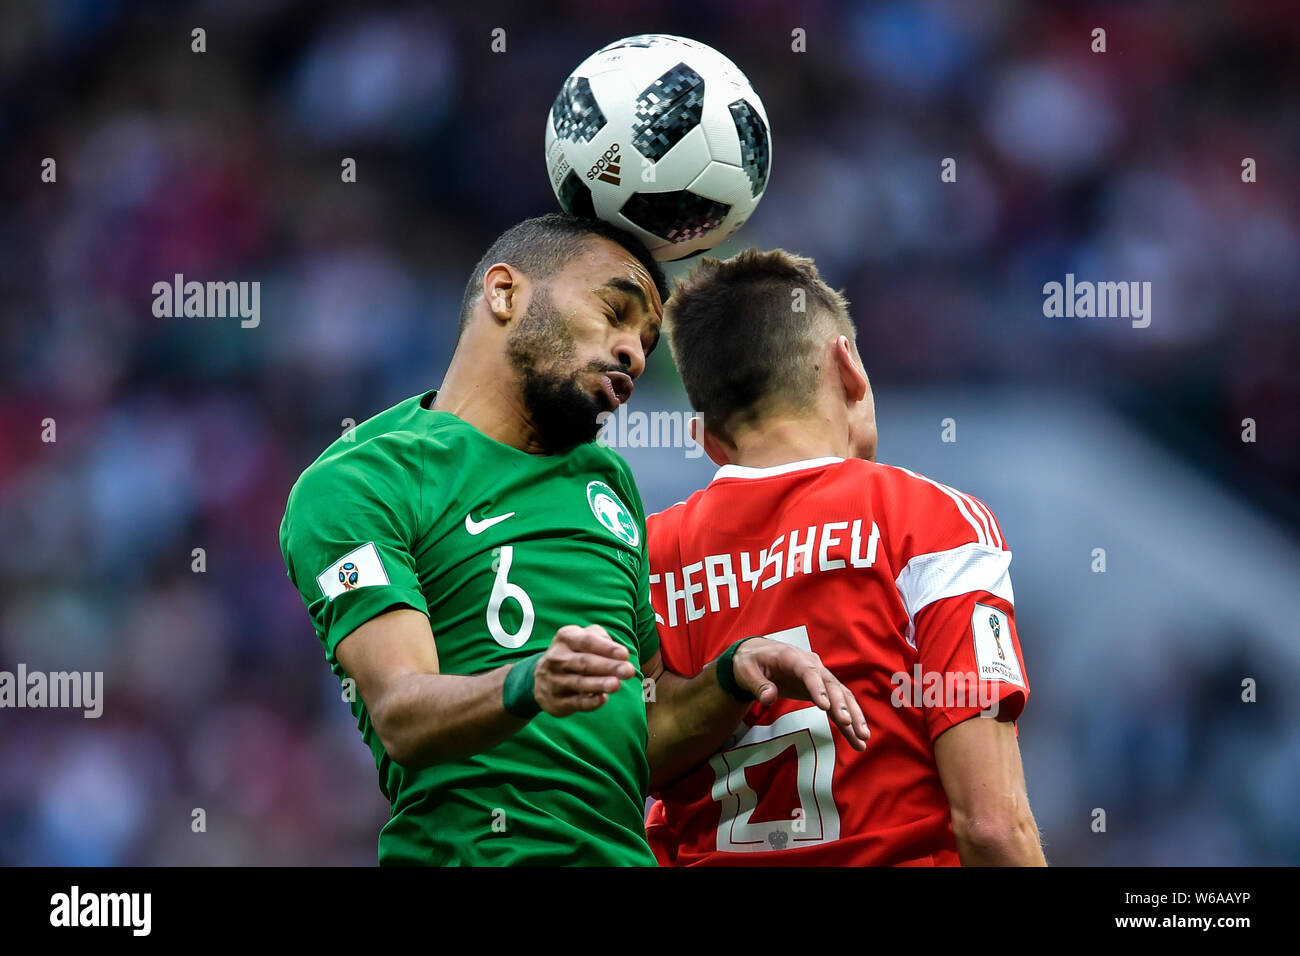 Denis Cheryshev of Russia, right, heads the ball against Mohammed Al-Breik of Saudi Arabia in their Group A match during the 2018 FIFA World Cup in Mo Stock Photo